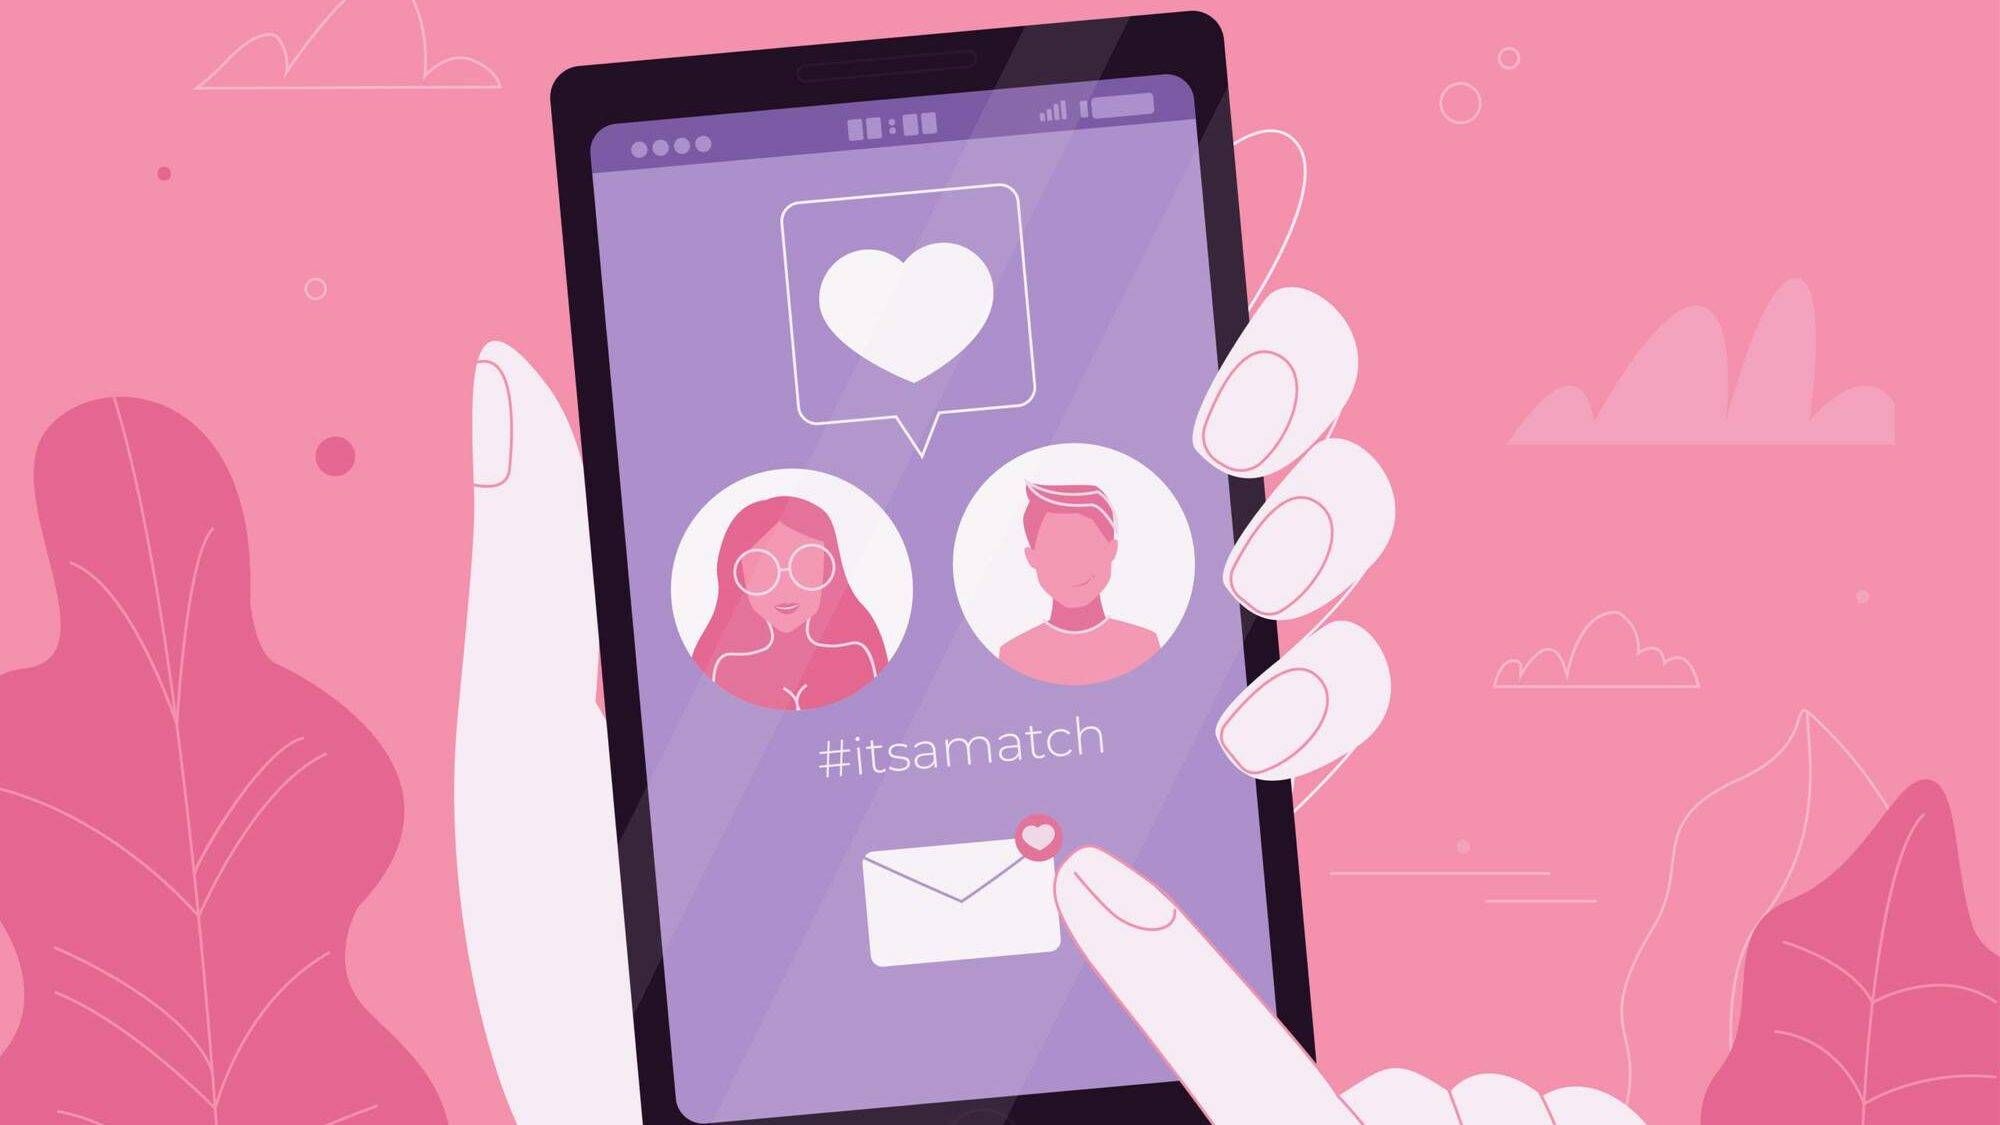 How to get started with online dating